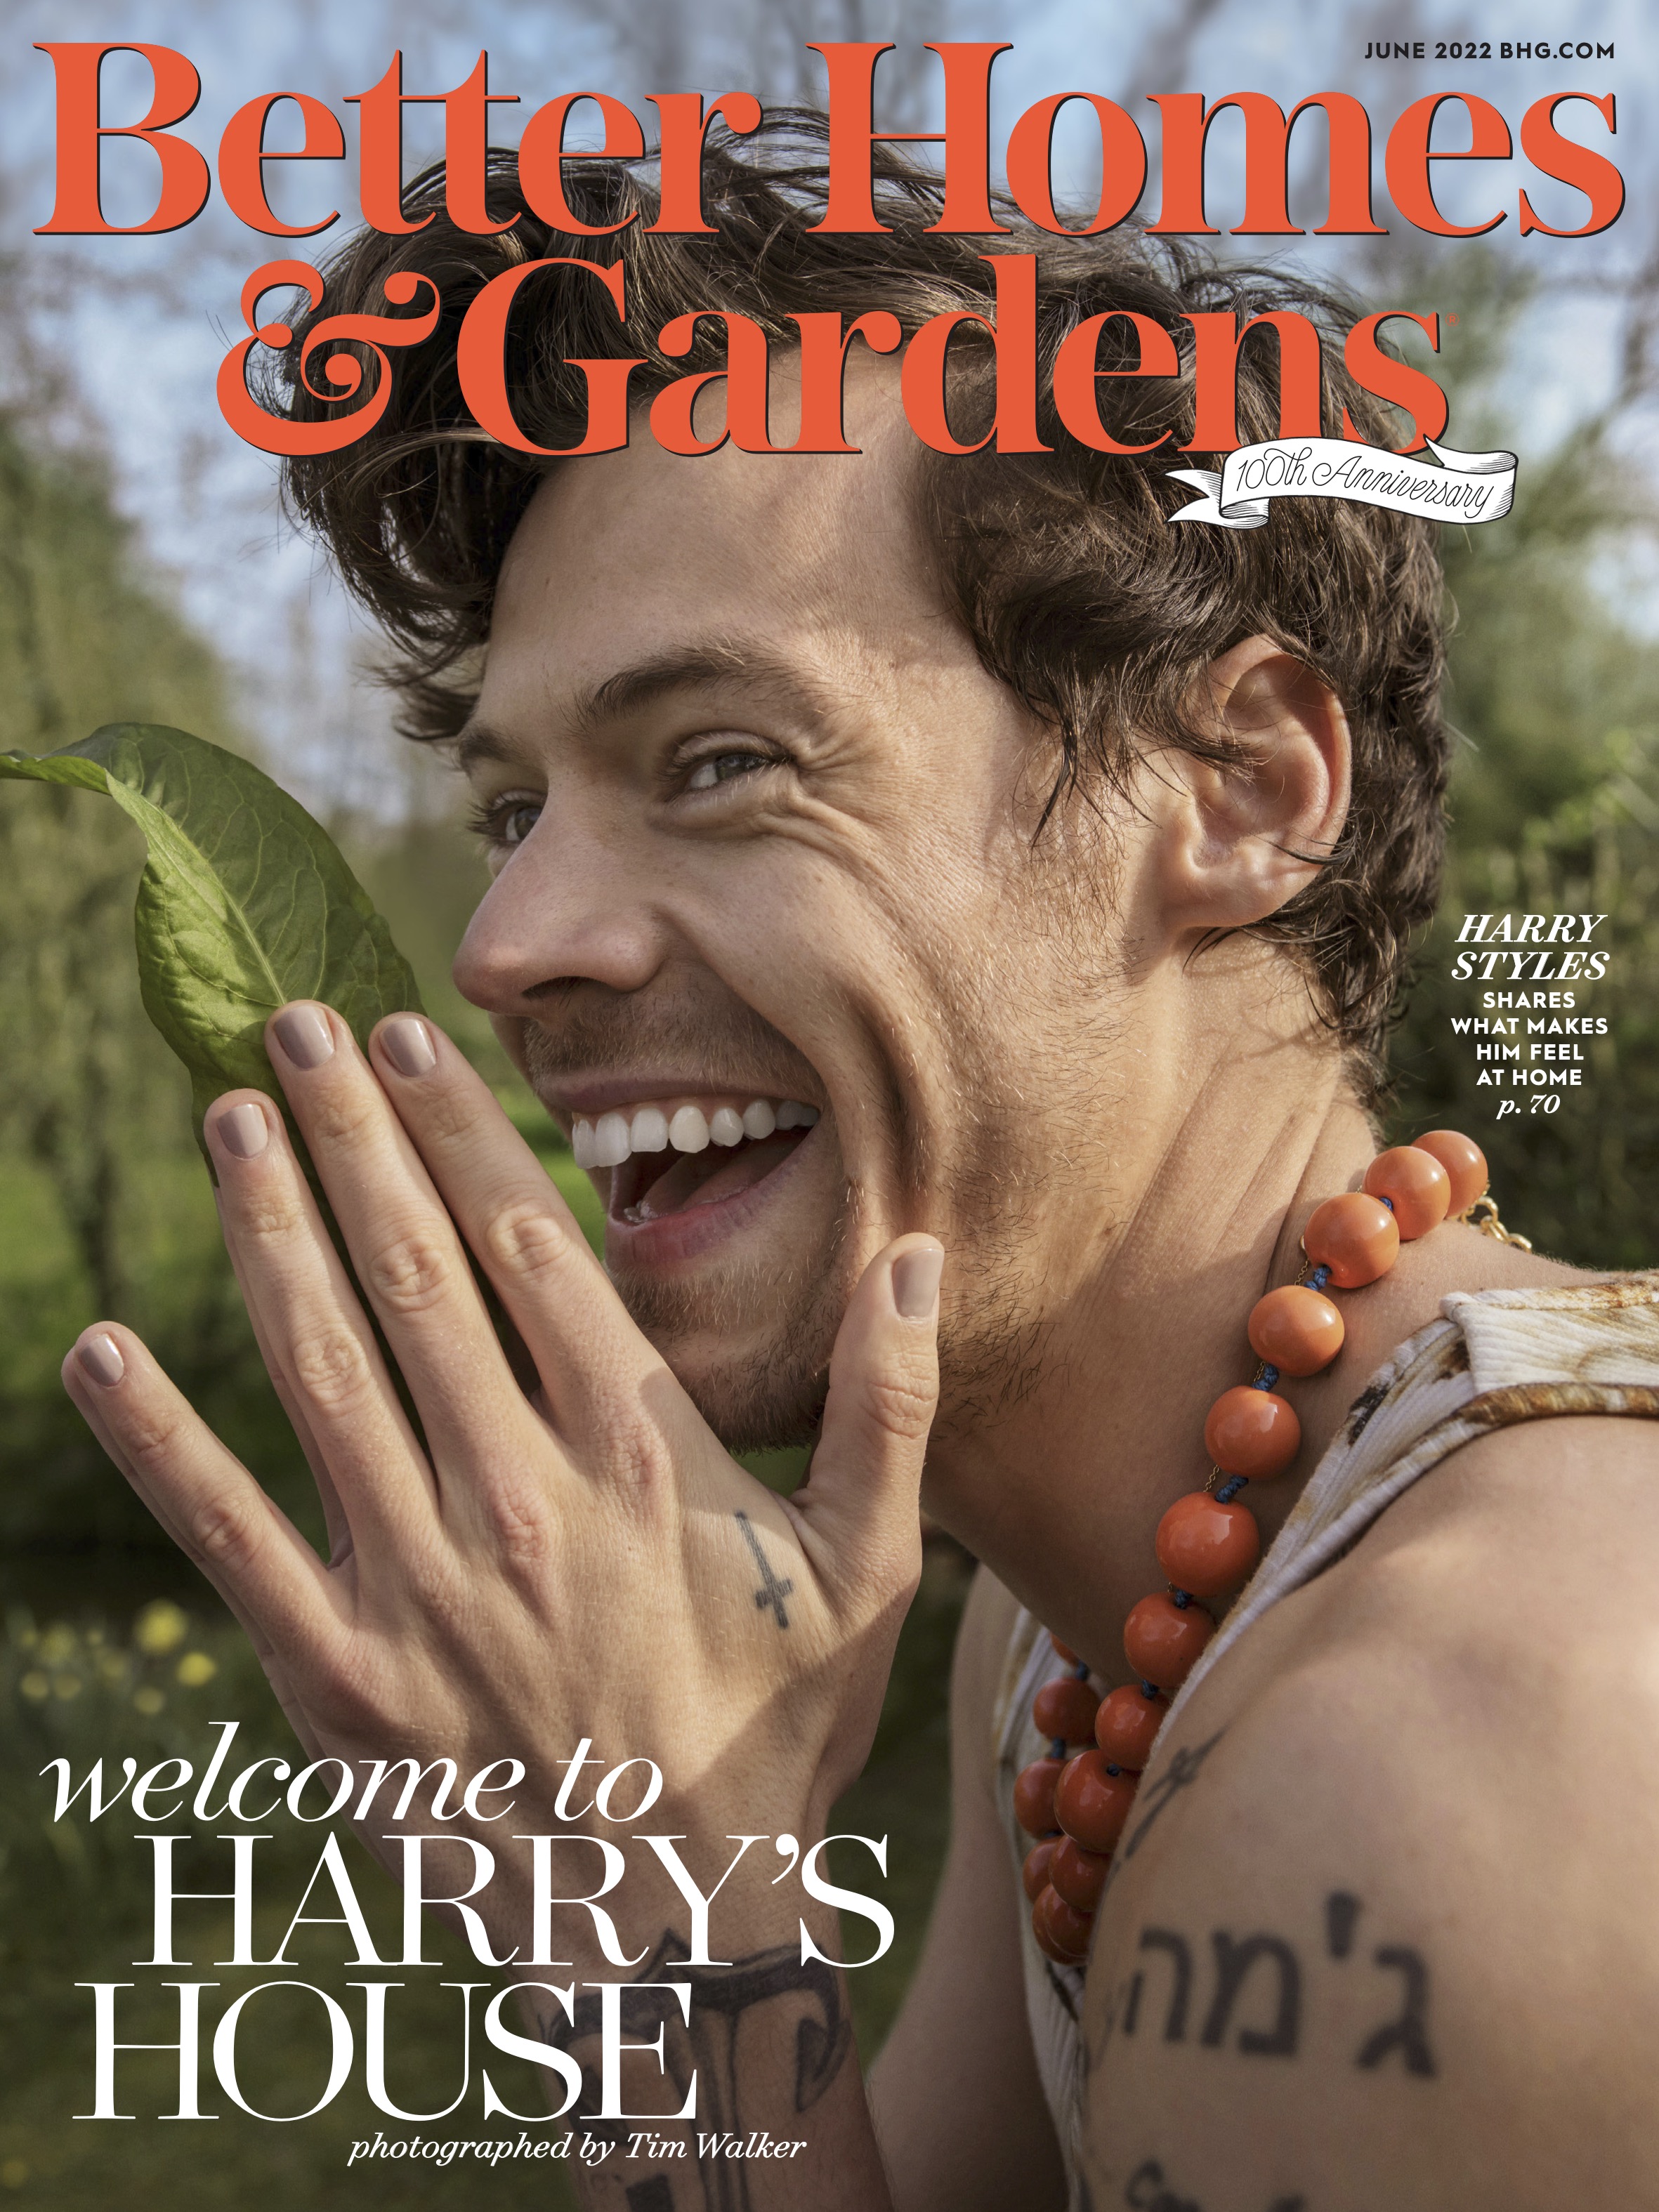 Better Homes and Gardens - “Welcome to Harry’s House” June 2022